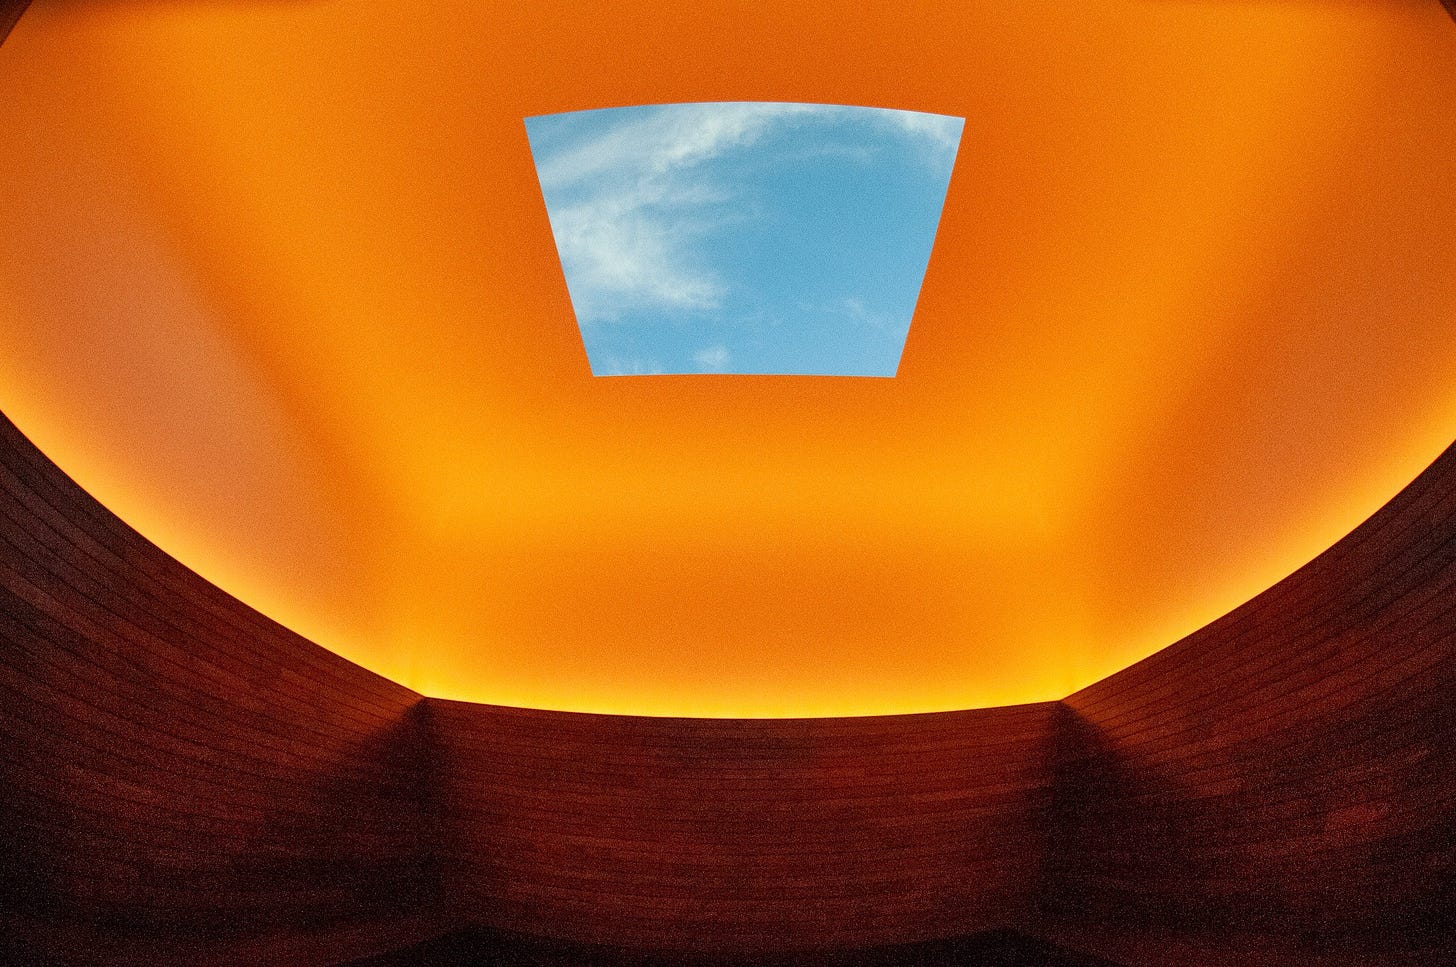 James Turrell creates “transcendent” installation in the Rocky Mountains